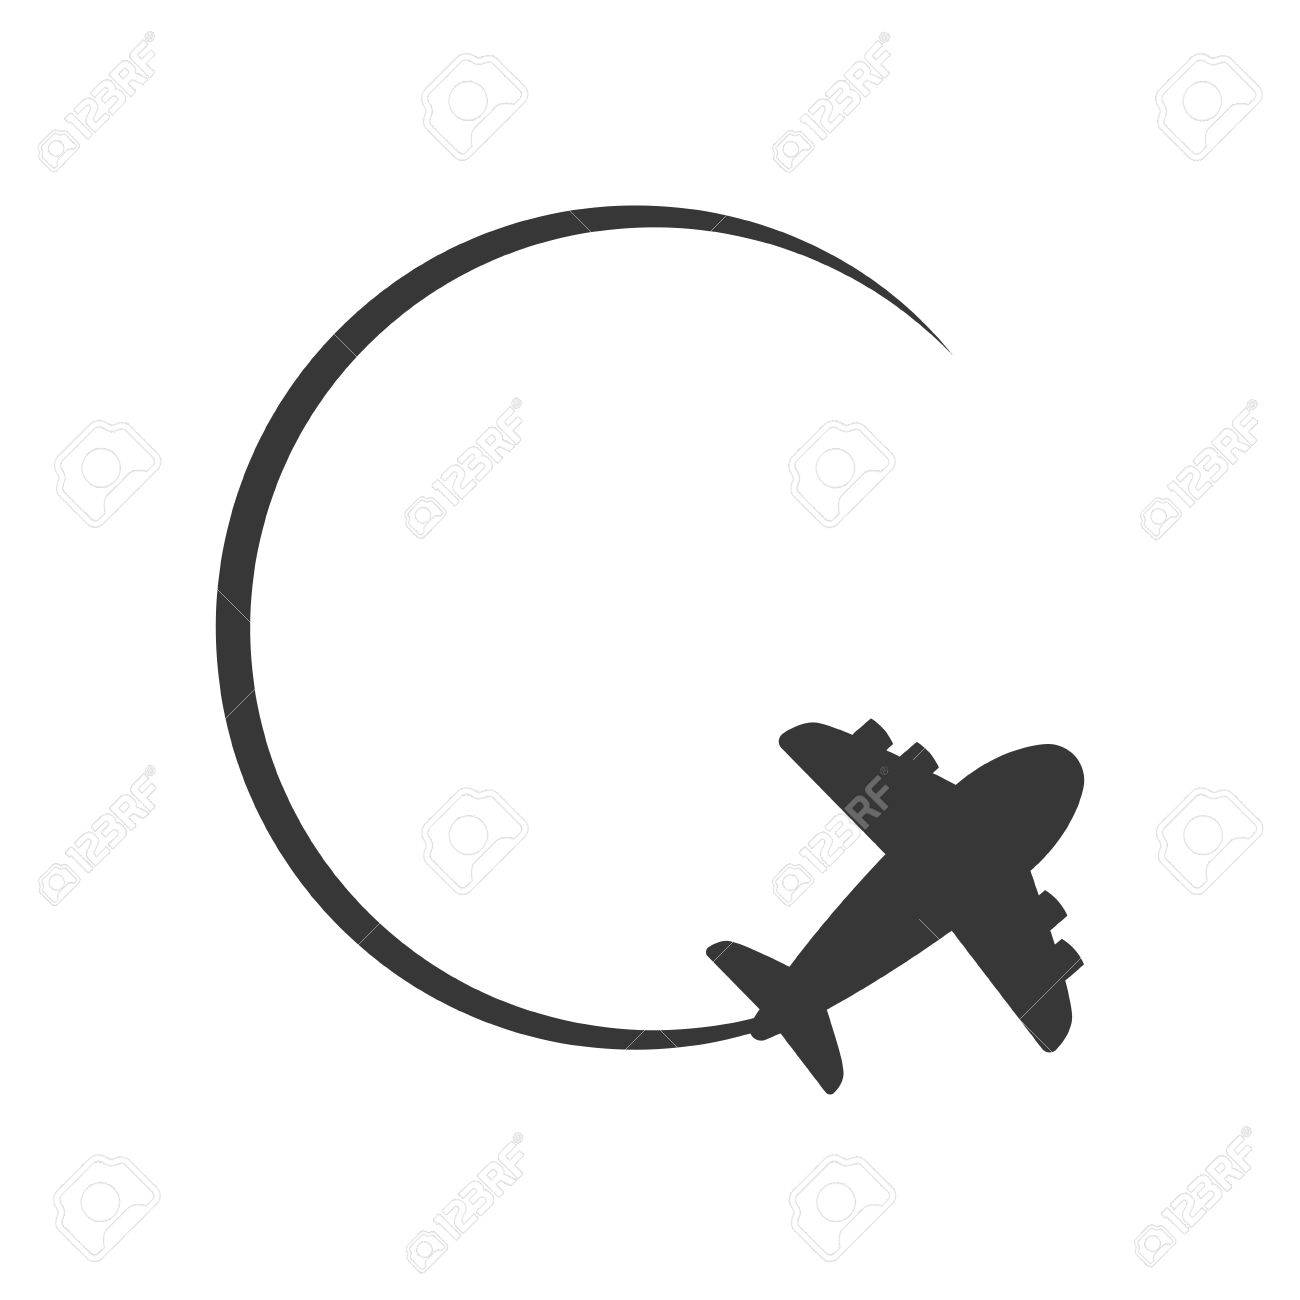 Clip Art of flying, traveling, flight, aircraft, airplane 